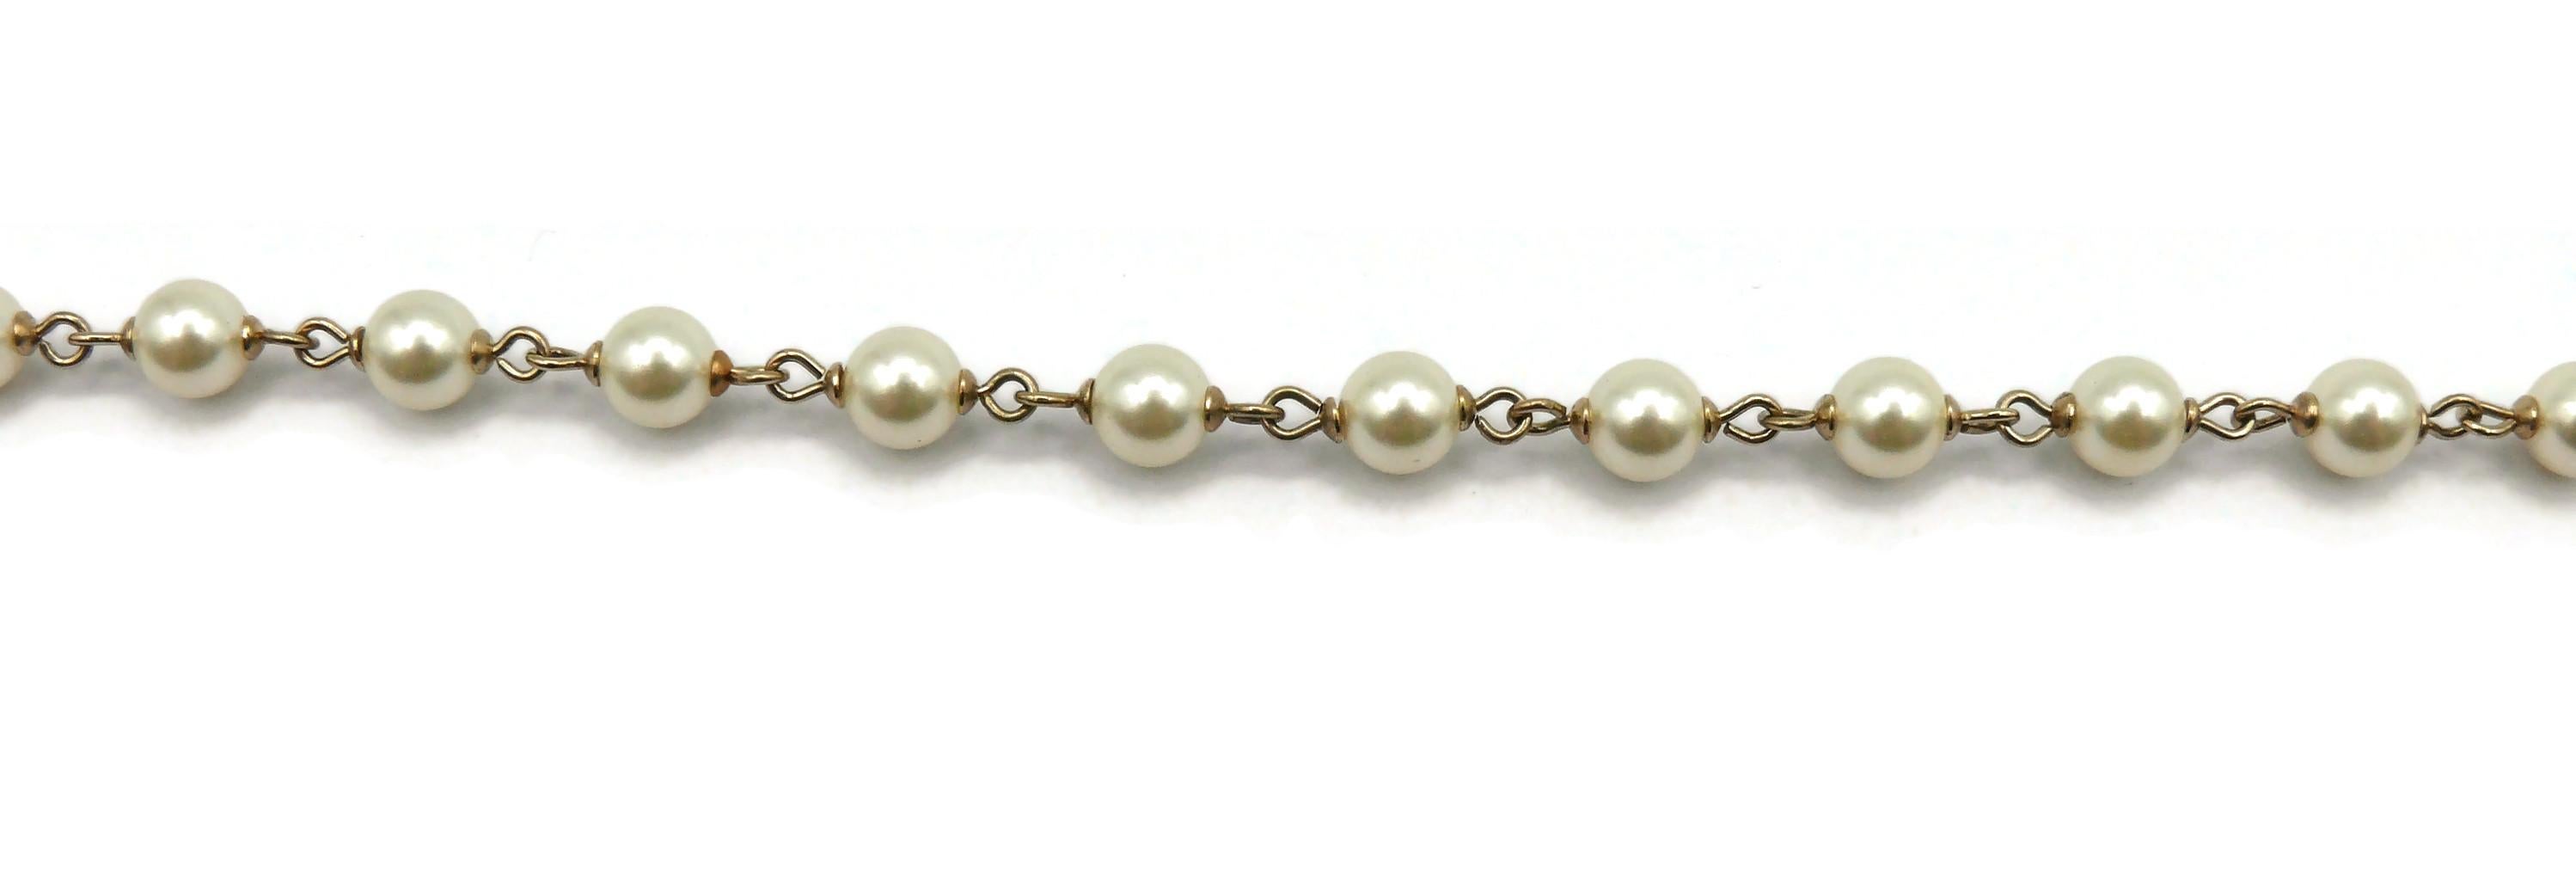 CHANEL by KARL LAGERFELD Faux Pearl CC Logo Necklace, 2008 For Sale 4